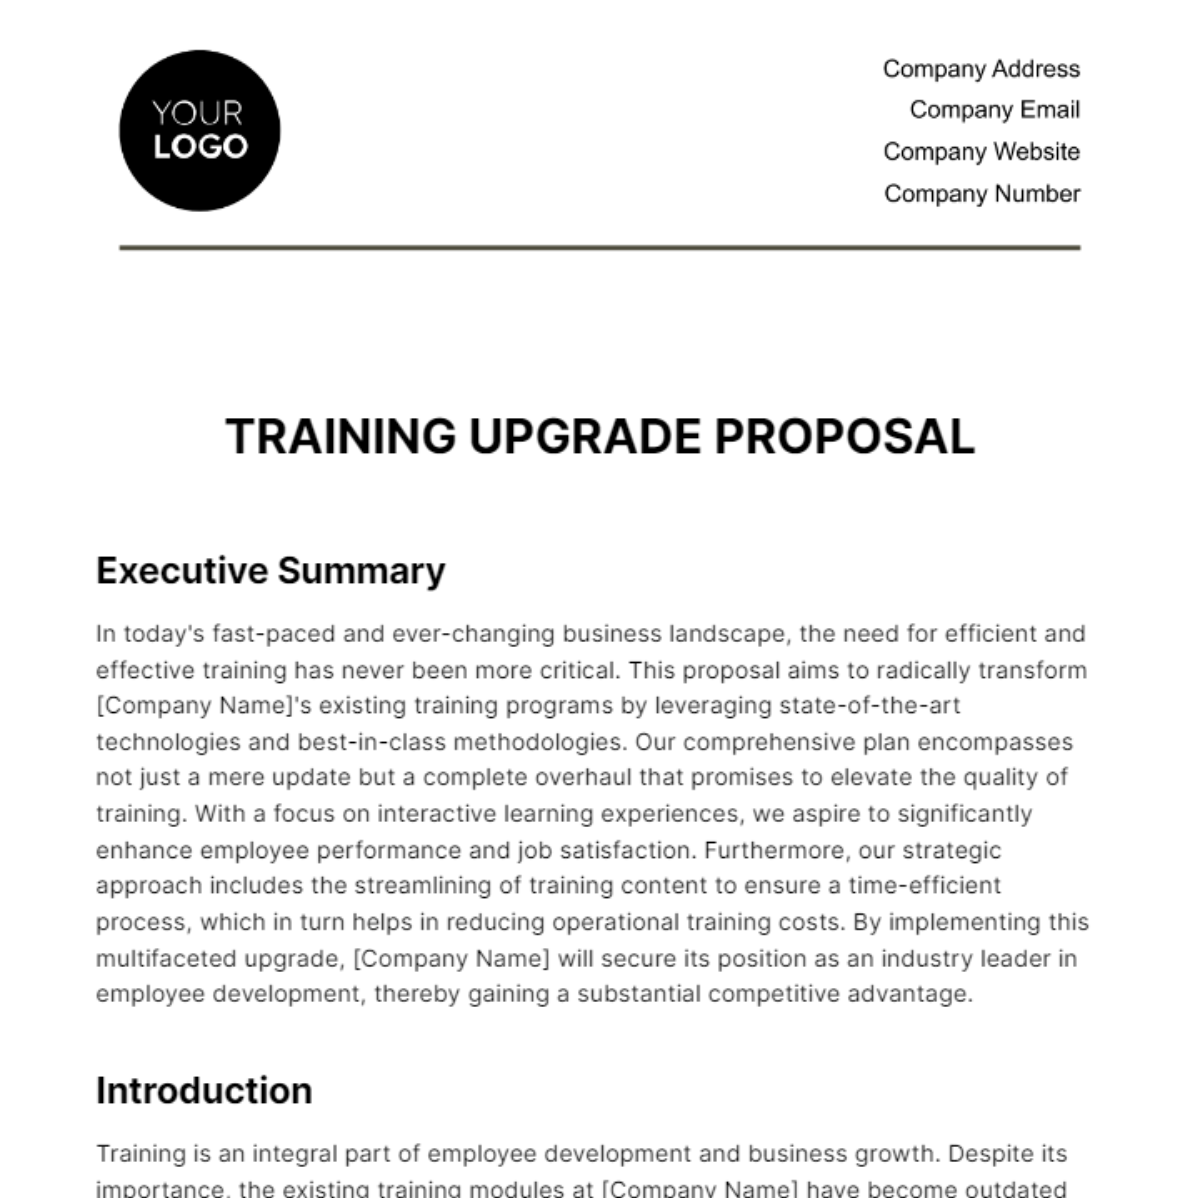 Free Training Upgrade Proposal HR Template